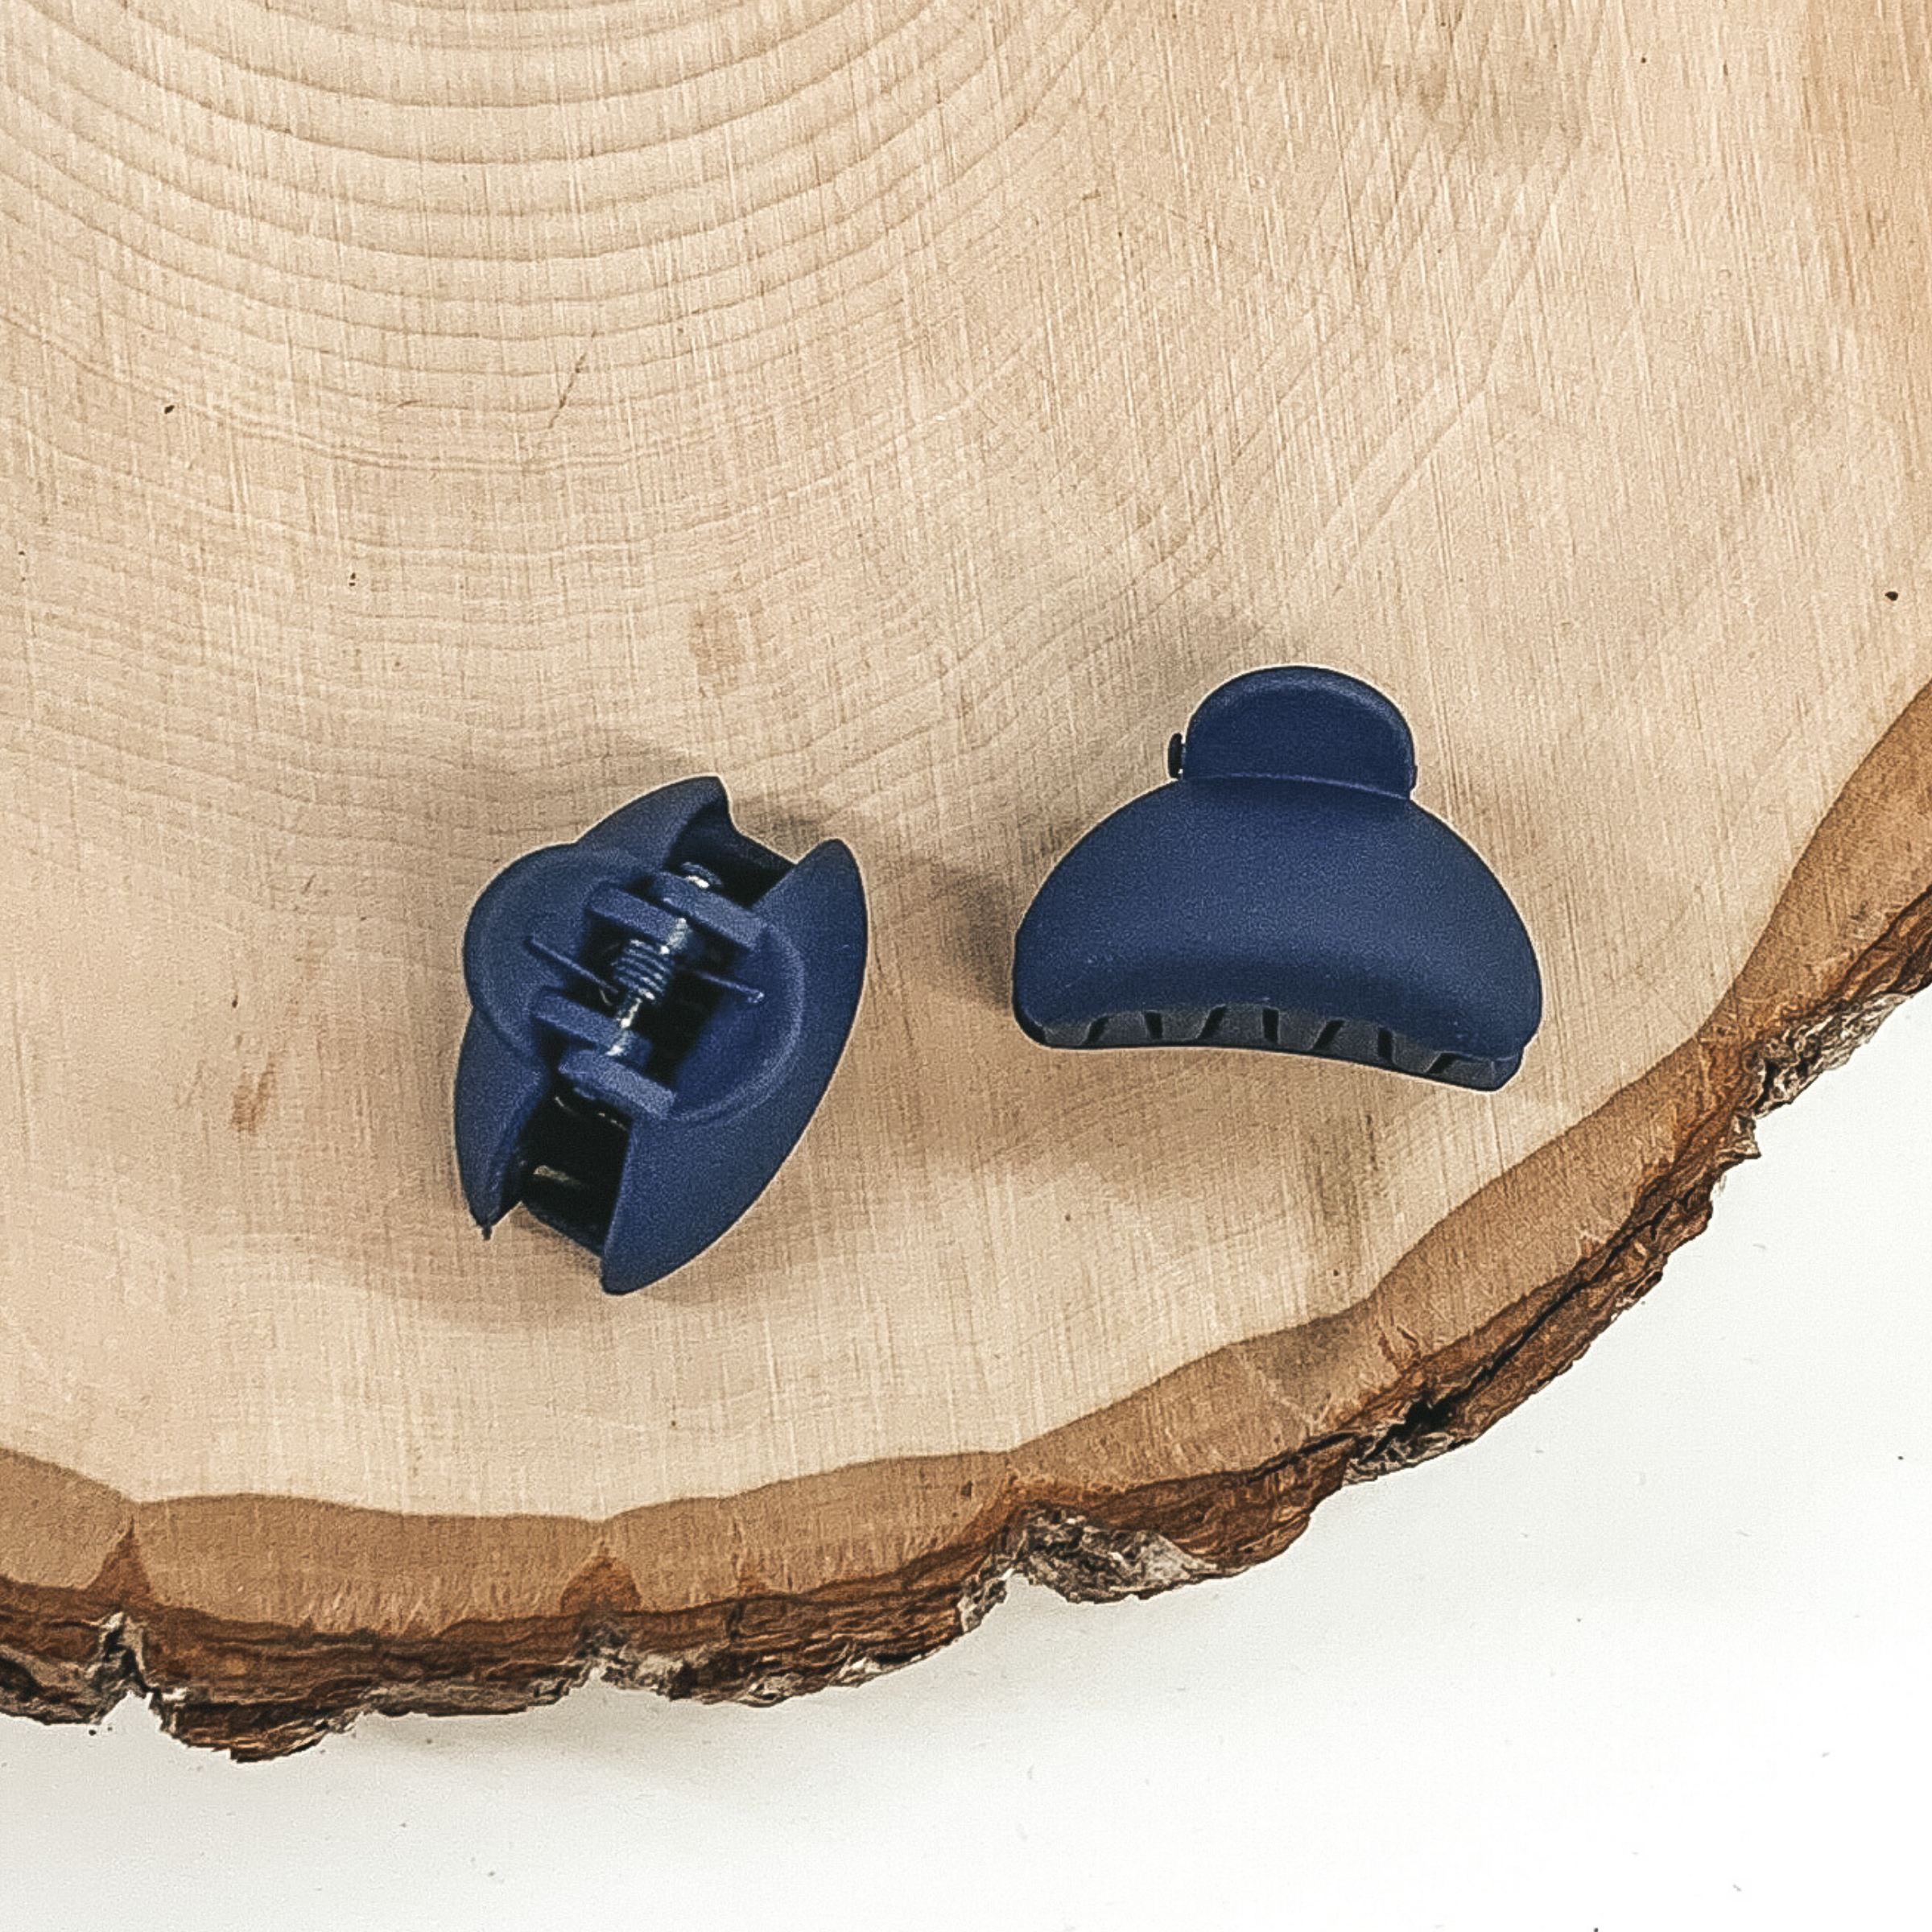 Matte navy blue oval claw clips with an oval cutout. This clip is pictured on a piece of wood on a white background.